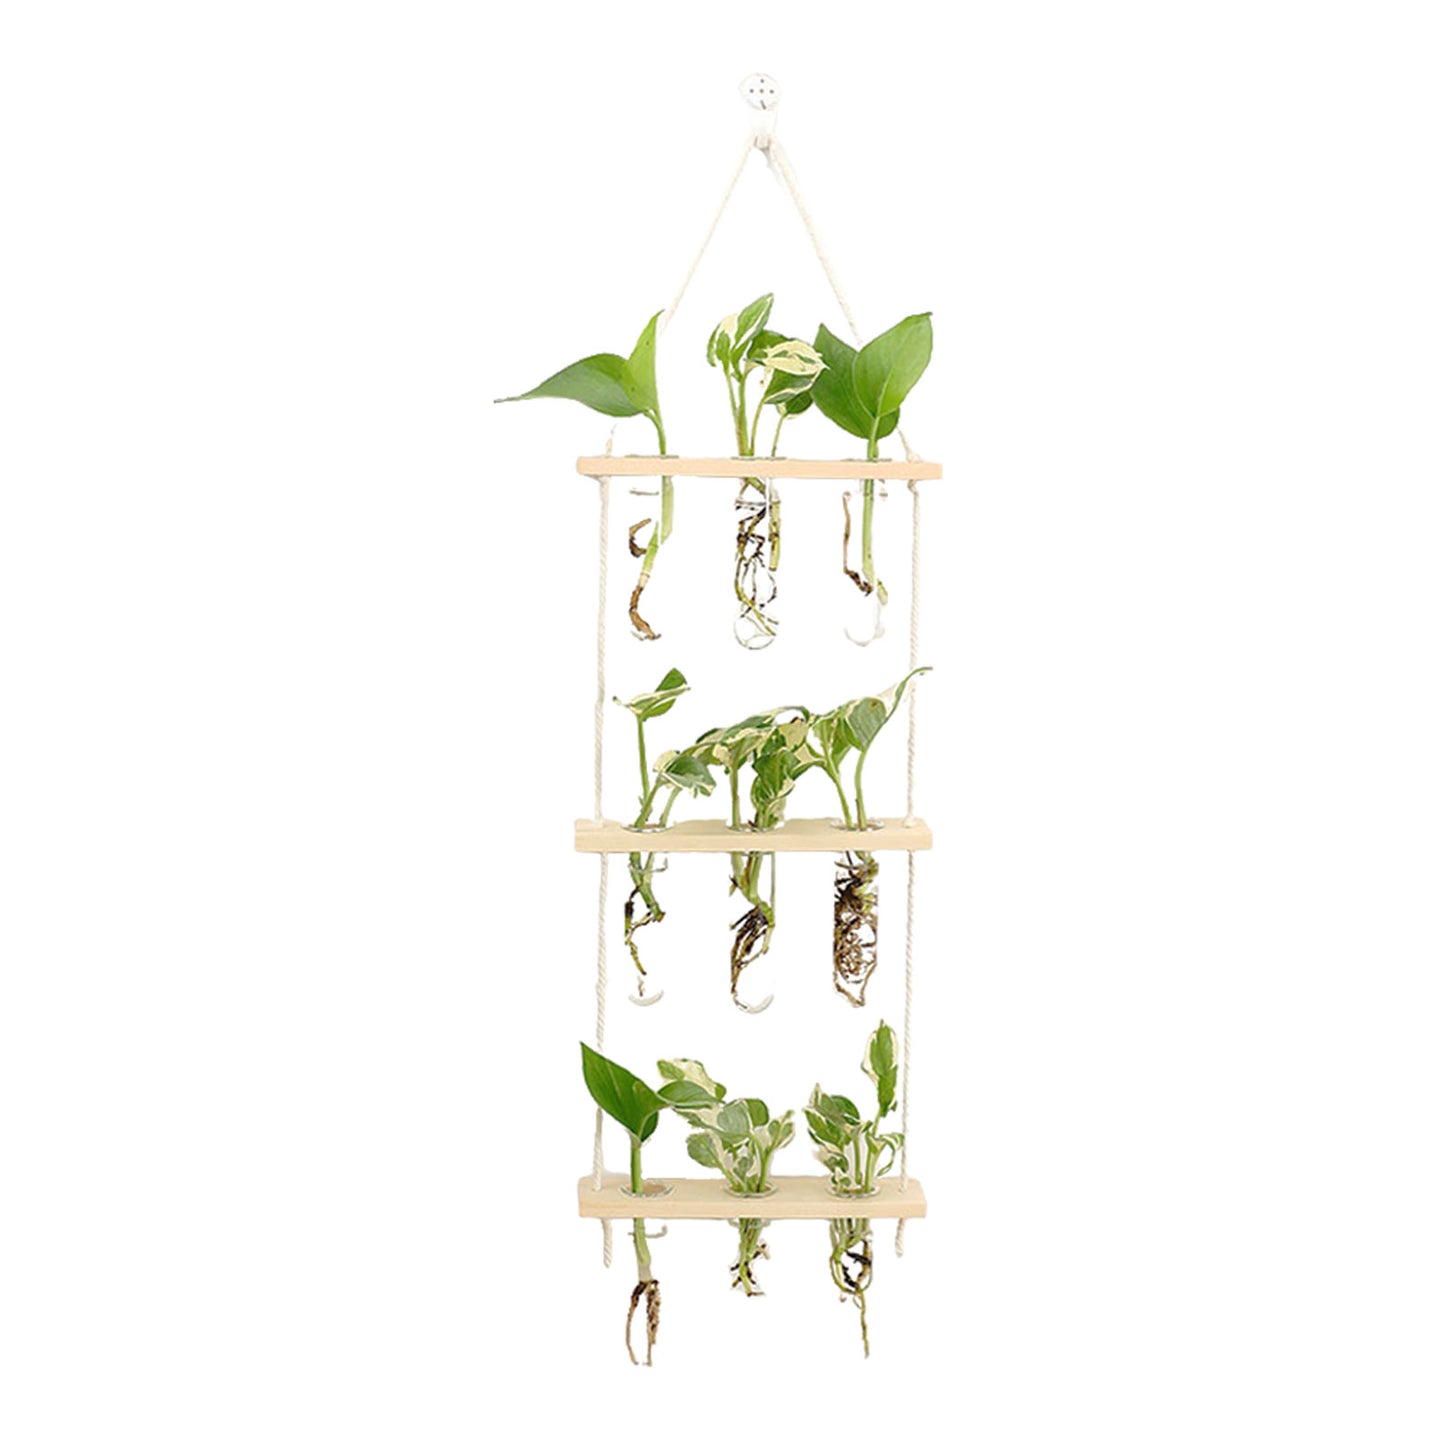 Wall-mounted Wall Hydroponic Glass Test Tube Vase